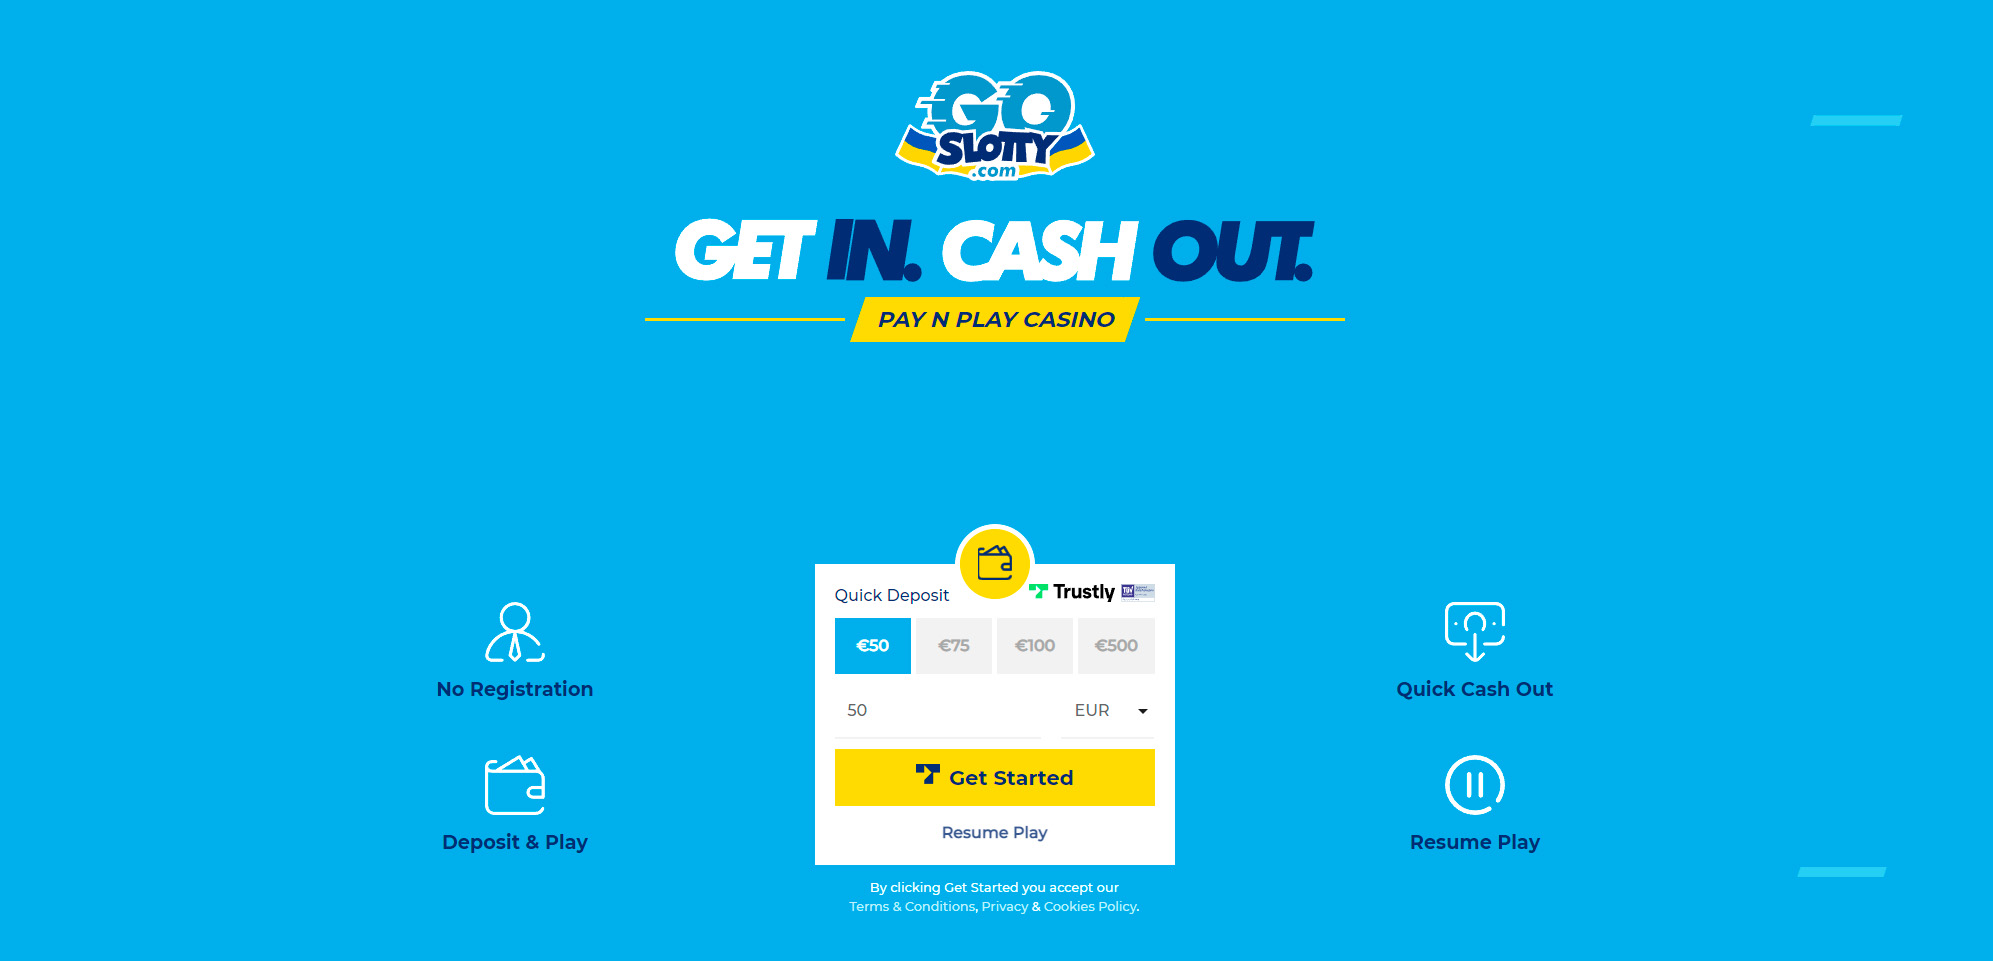 The Faster You get into Casino – the Faster you Cash Out